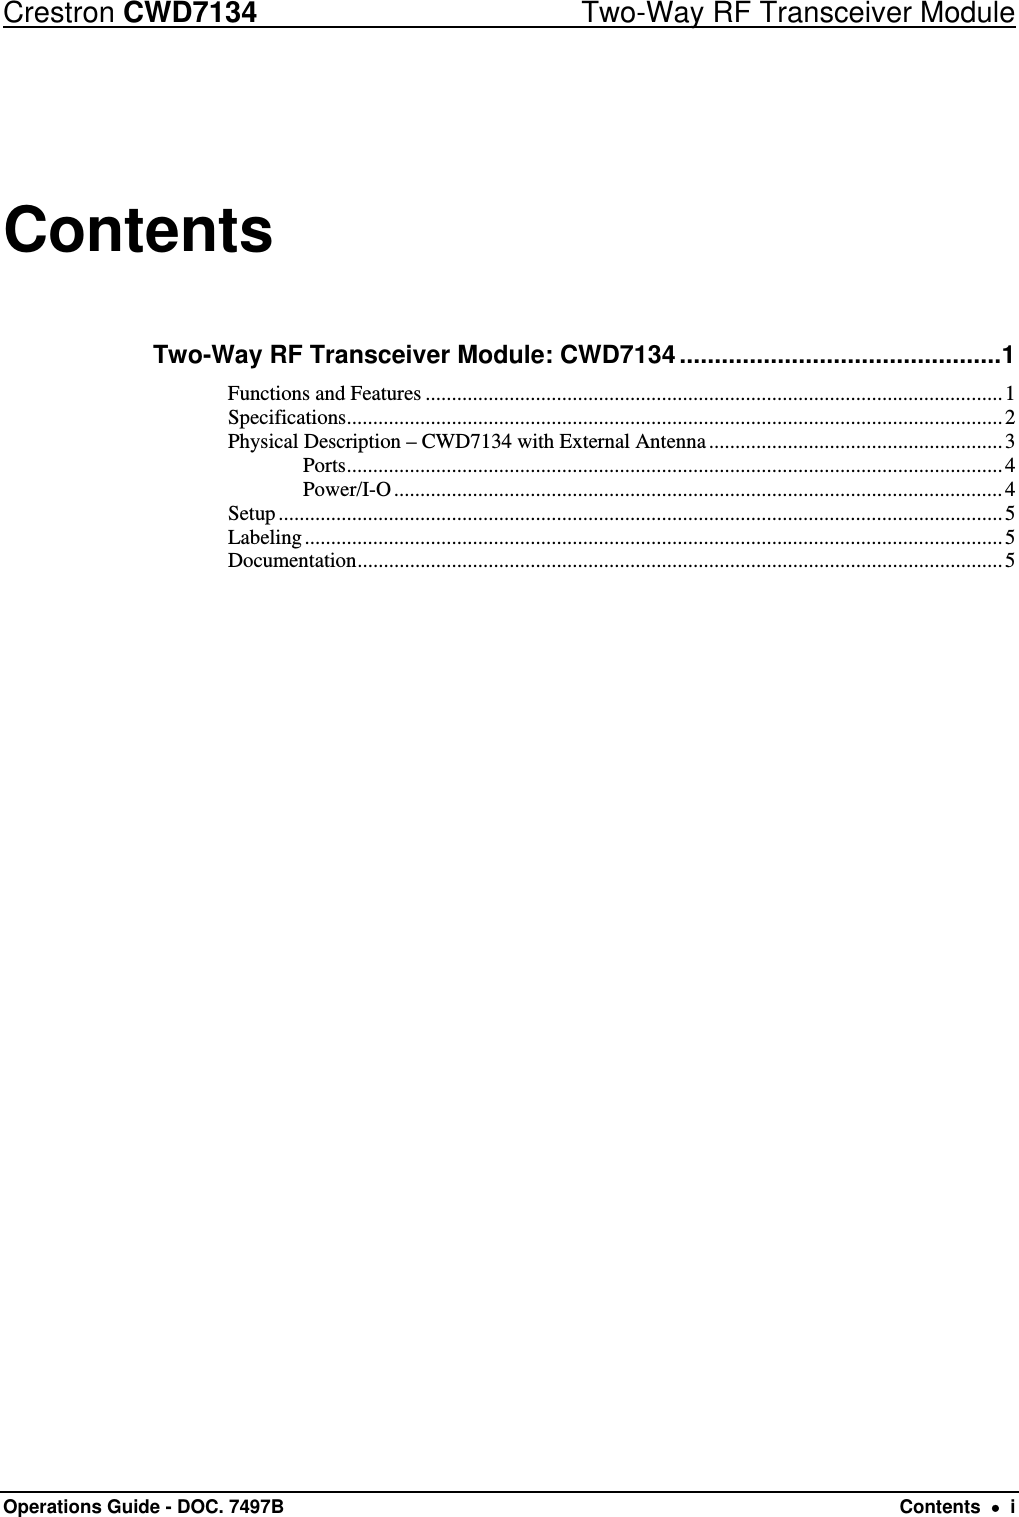 Crestron CWD7134  Two-Way RF Transceiver Module Operations Guide - DOC. 7497B  Contents    i Contents Two-Way RF Transceiver Module: CWD7134 .............................................. 1Functions and Features .............................................................................................................. 1Specifications ............................................................................................................................. 2Physical Description – CWD7134 with External Antenna ........................................................ 3Ports ............................................................................................................................. 4Power/I-O .................................................................................................................... 4Setup .......................................................................................................................................... 5Labeling ..................................................................................................................................... 5Documentation ........................................................................................................................... 5